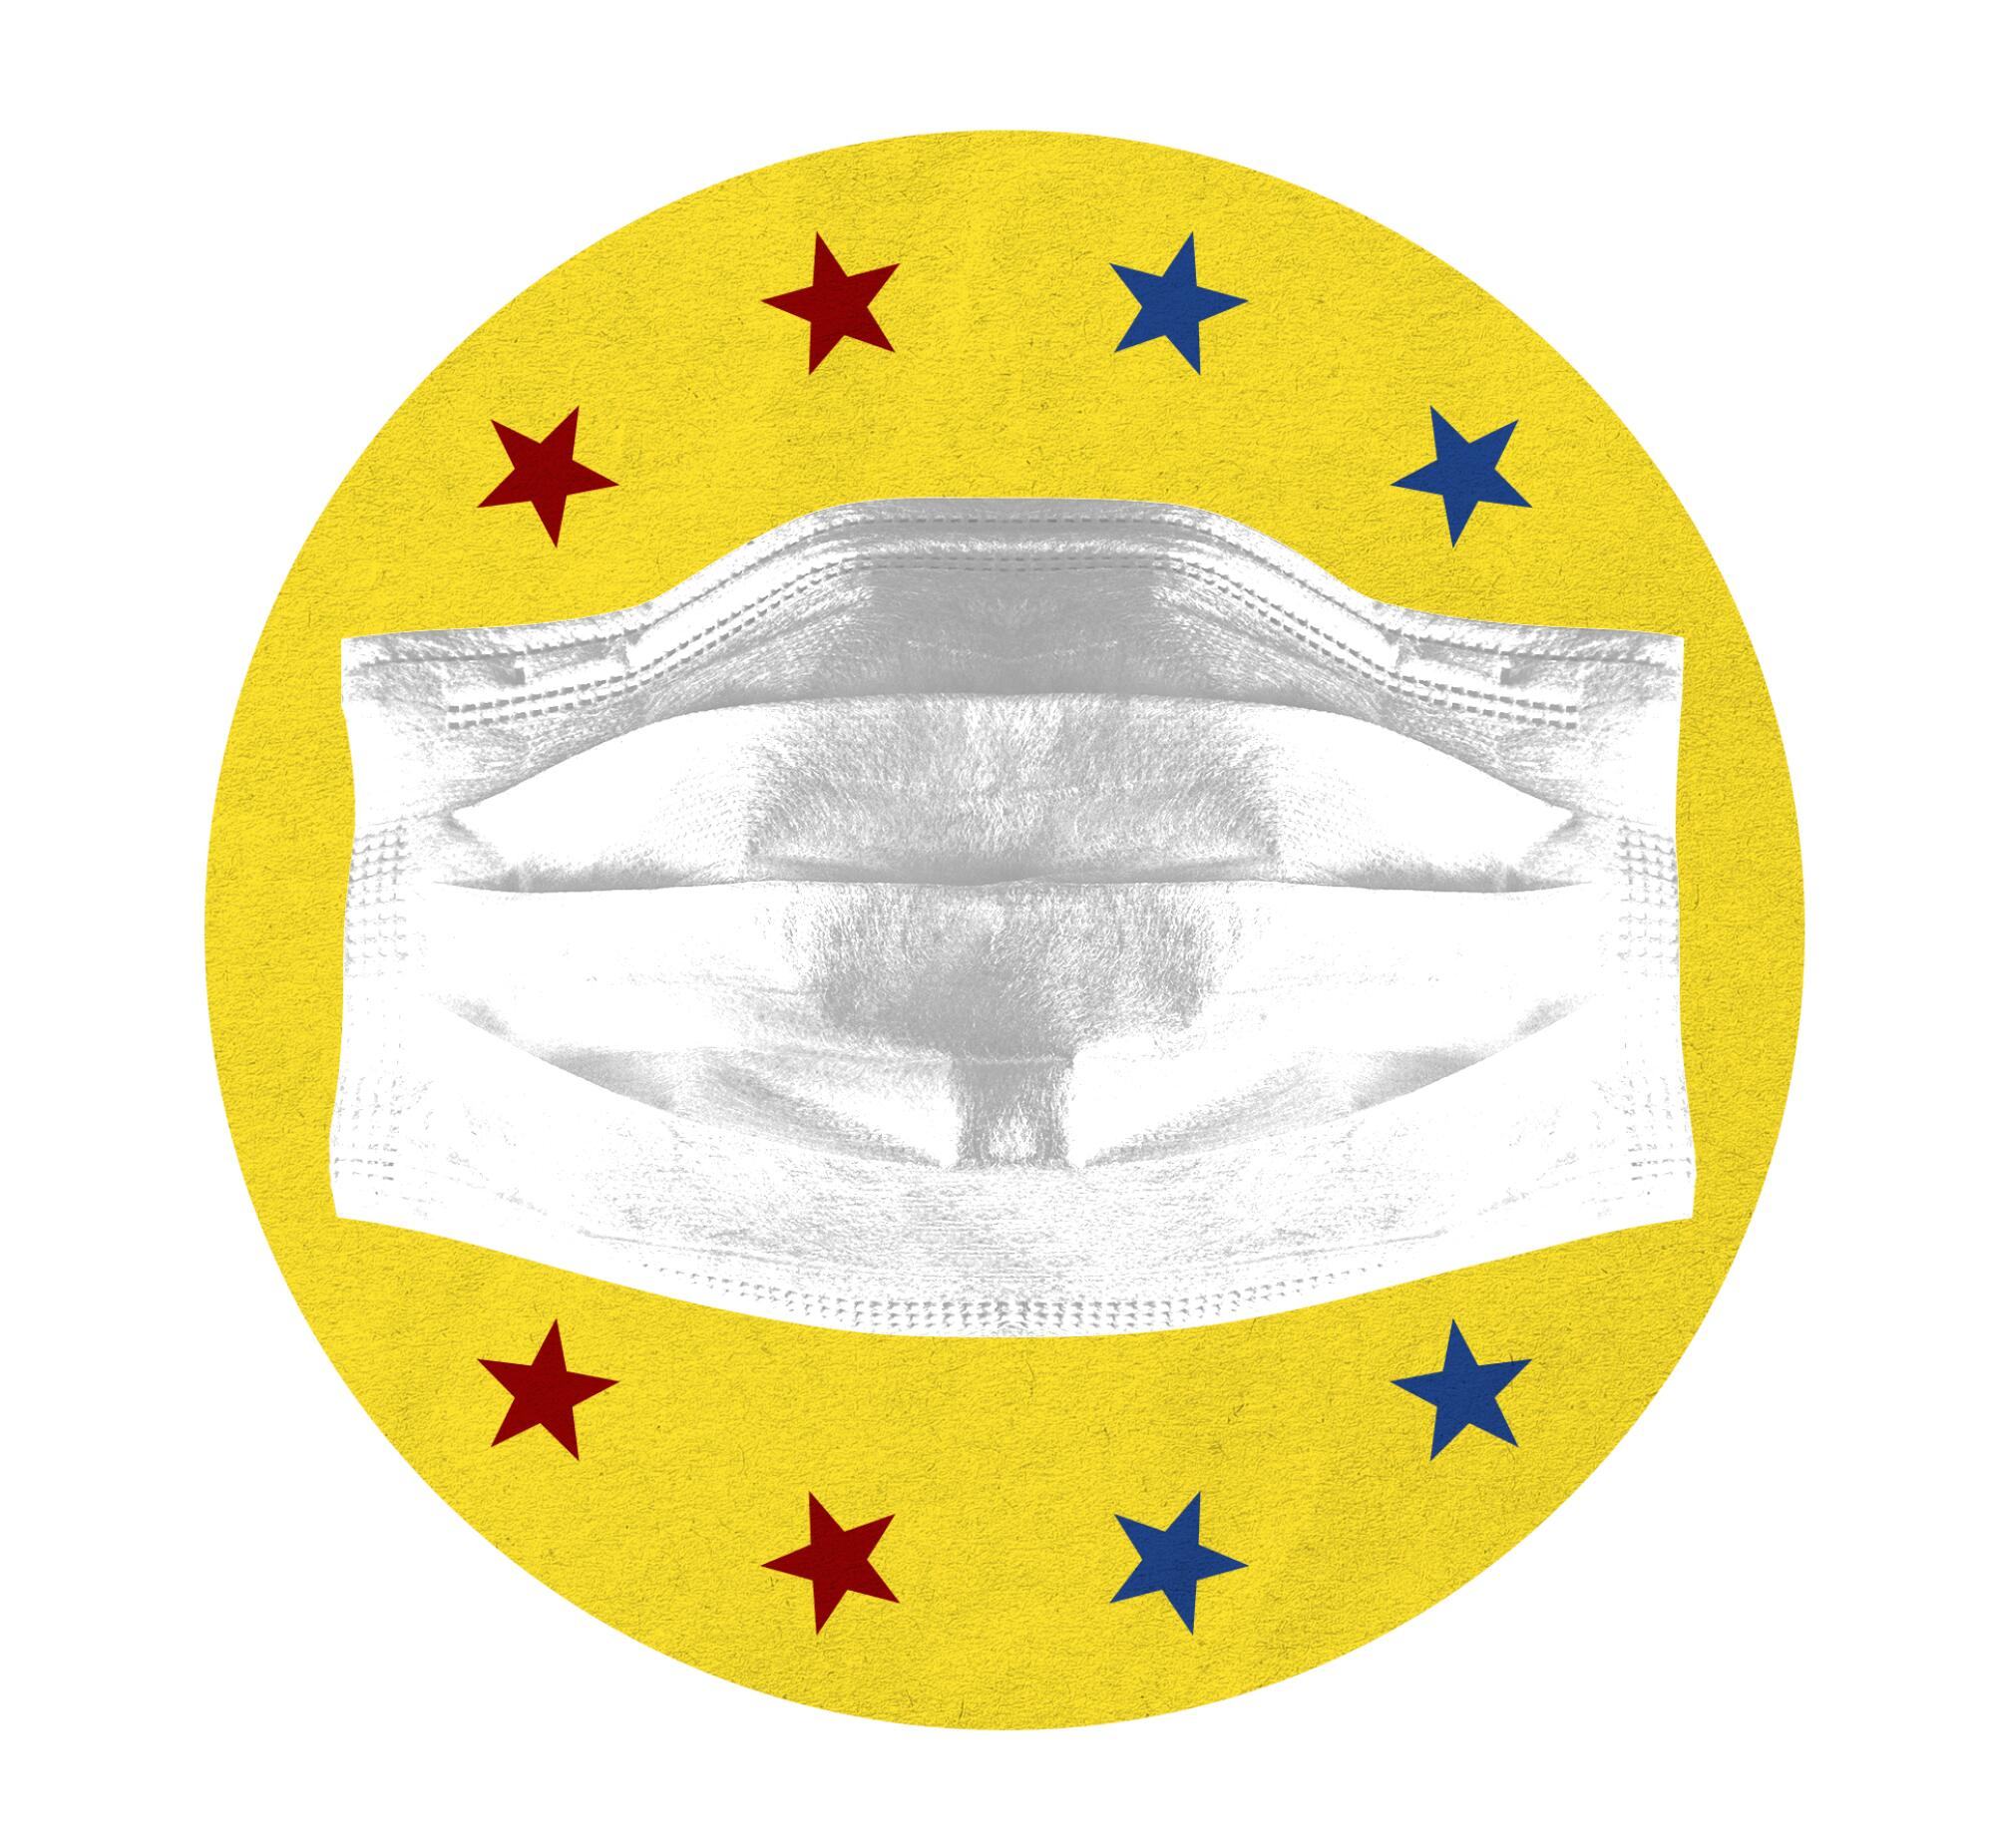 Photo of Covid mask in a yellow circle